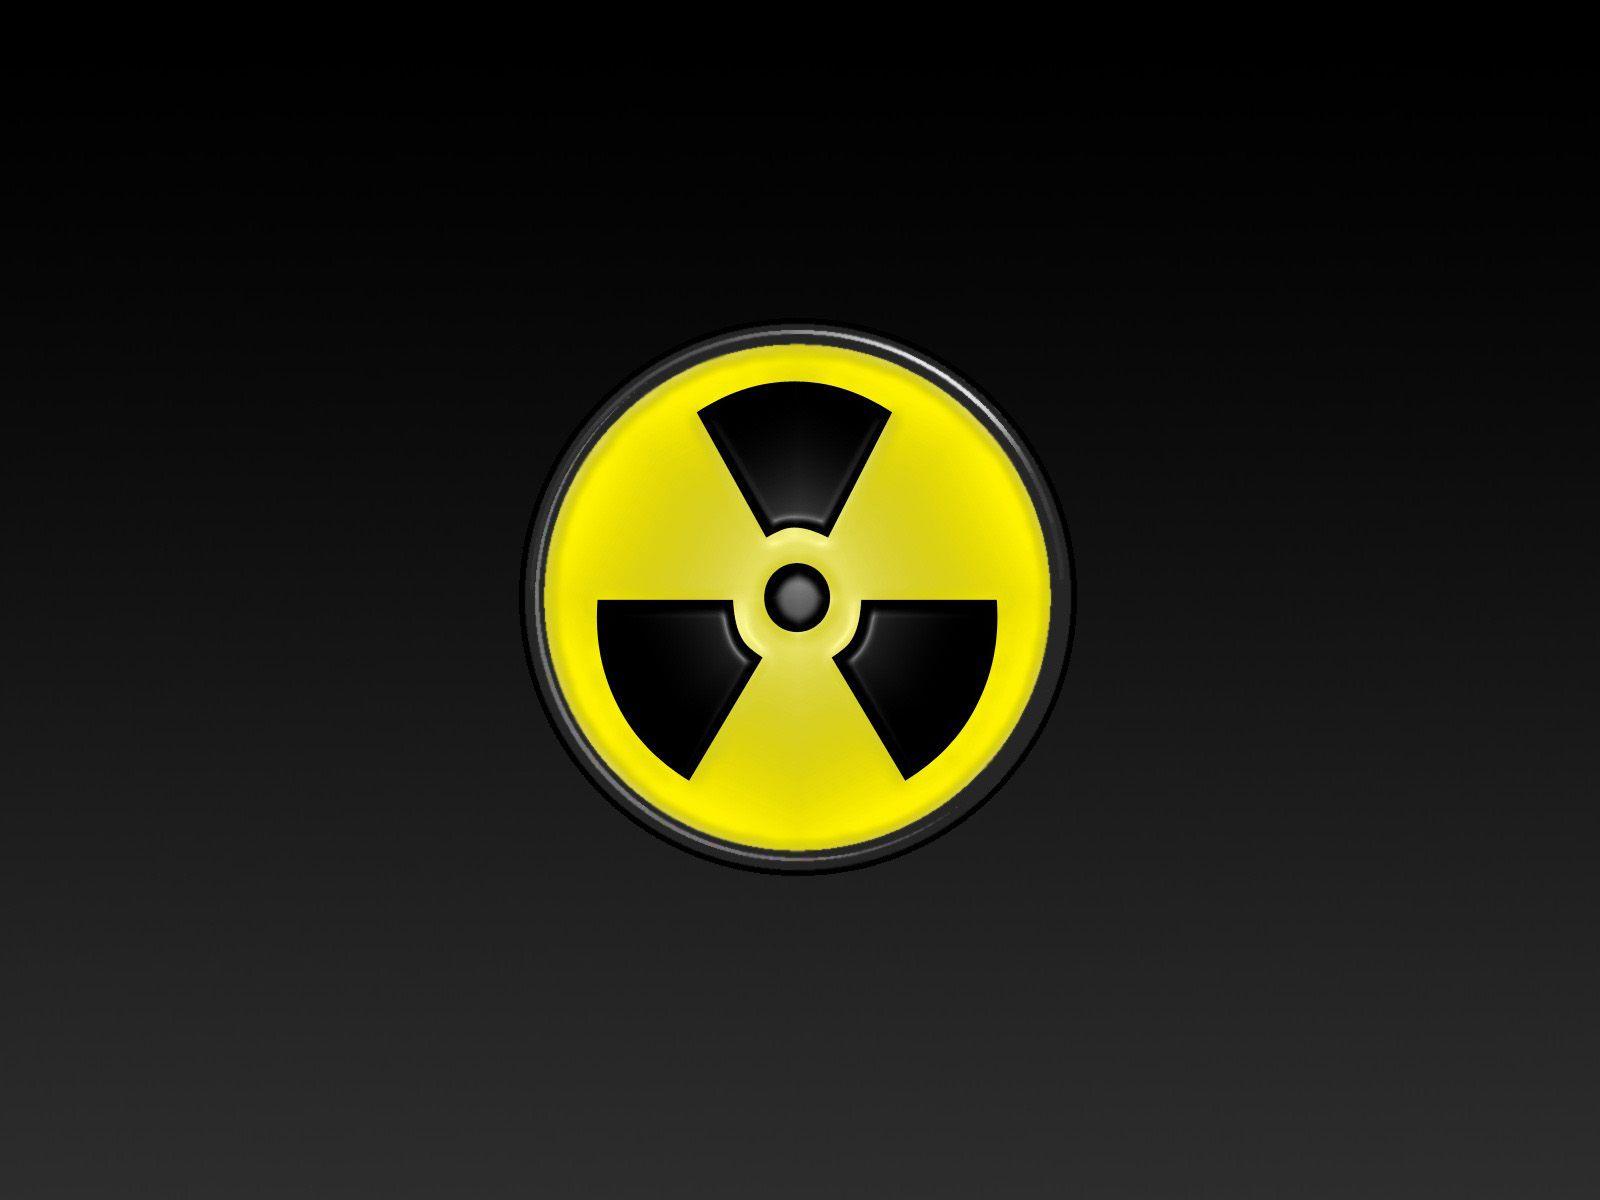 Nuclear Wallpaper, 100% Full HDQ Nuclear Image